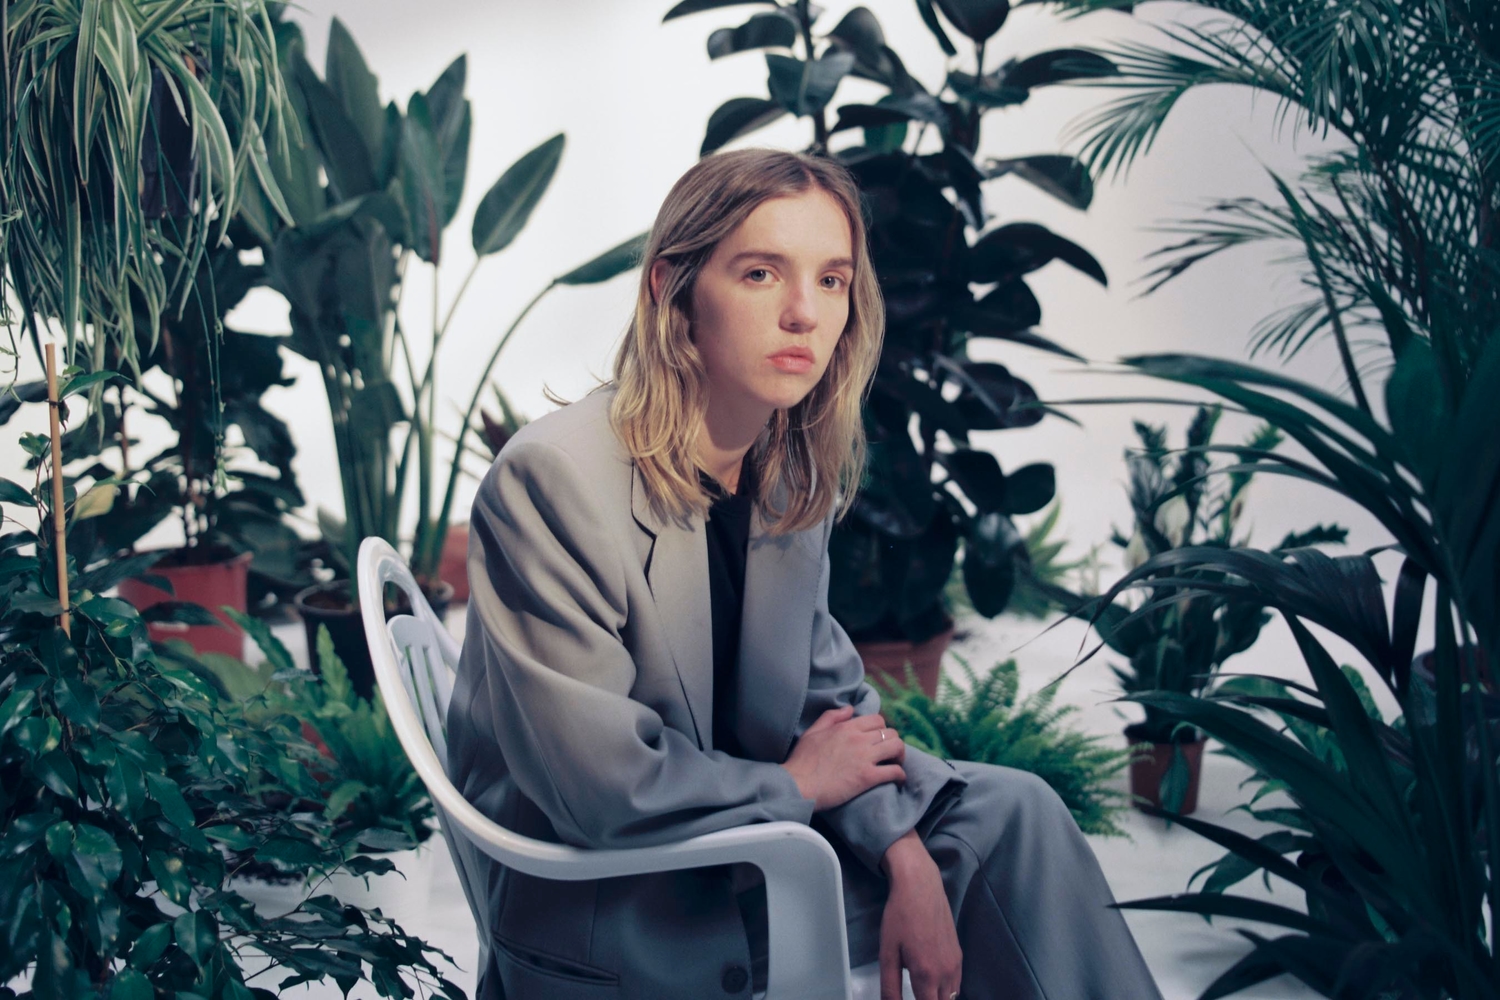 The Japanese House unveils dreamy new track ‘Chewing Cotton Wool’